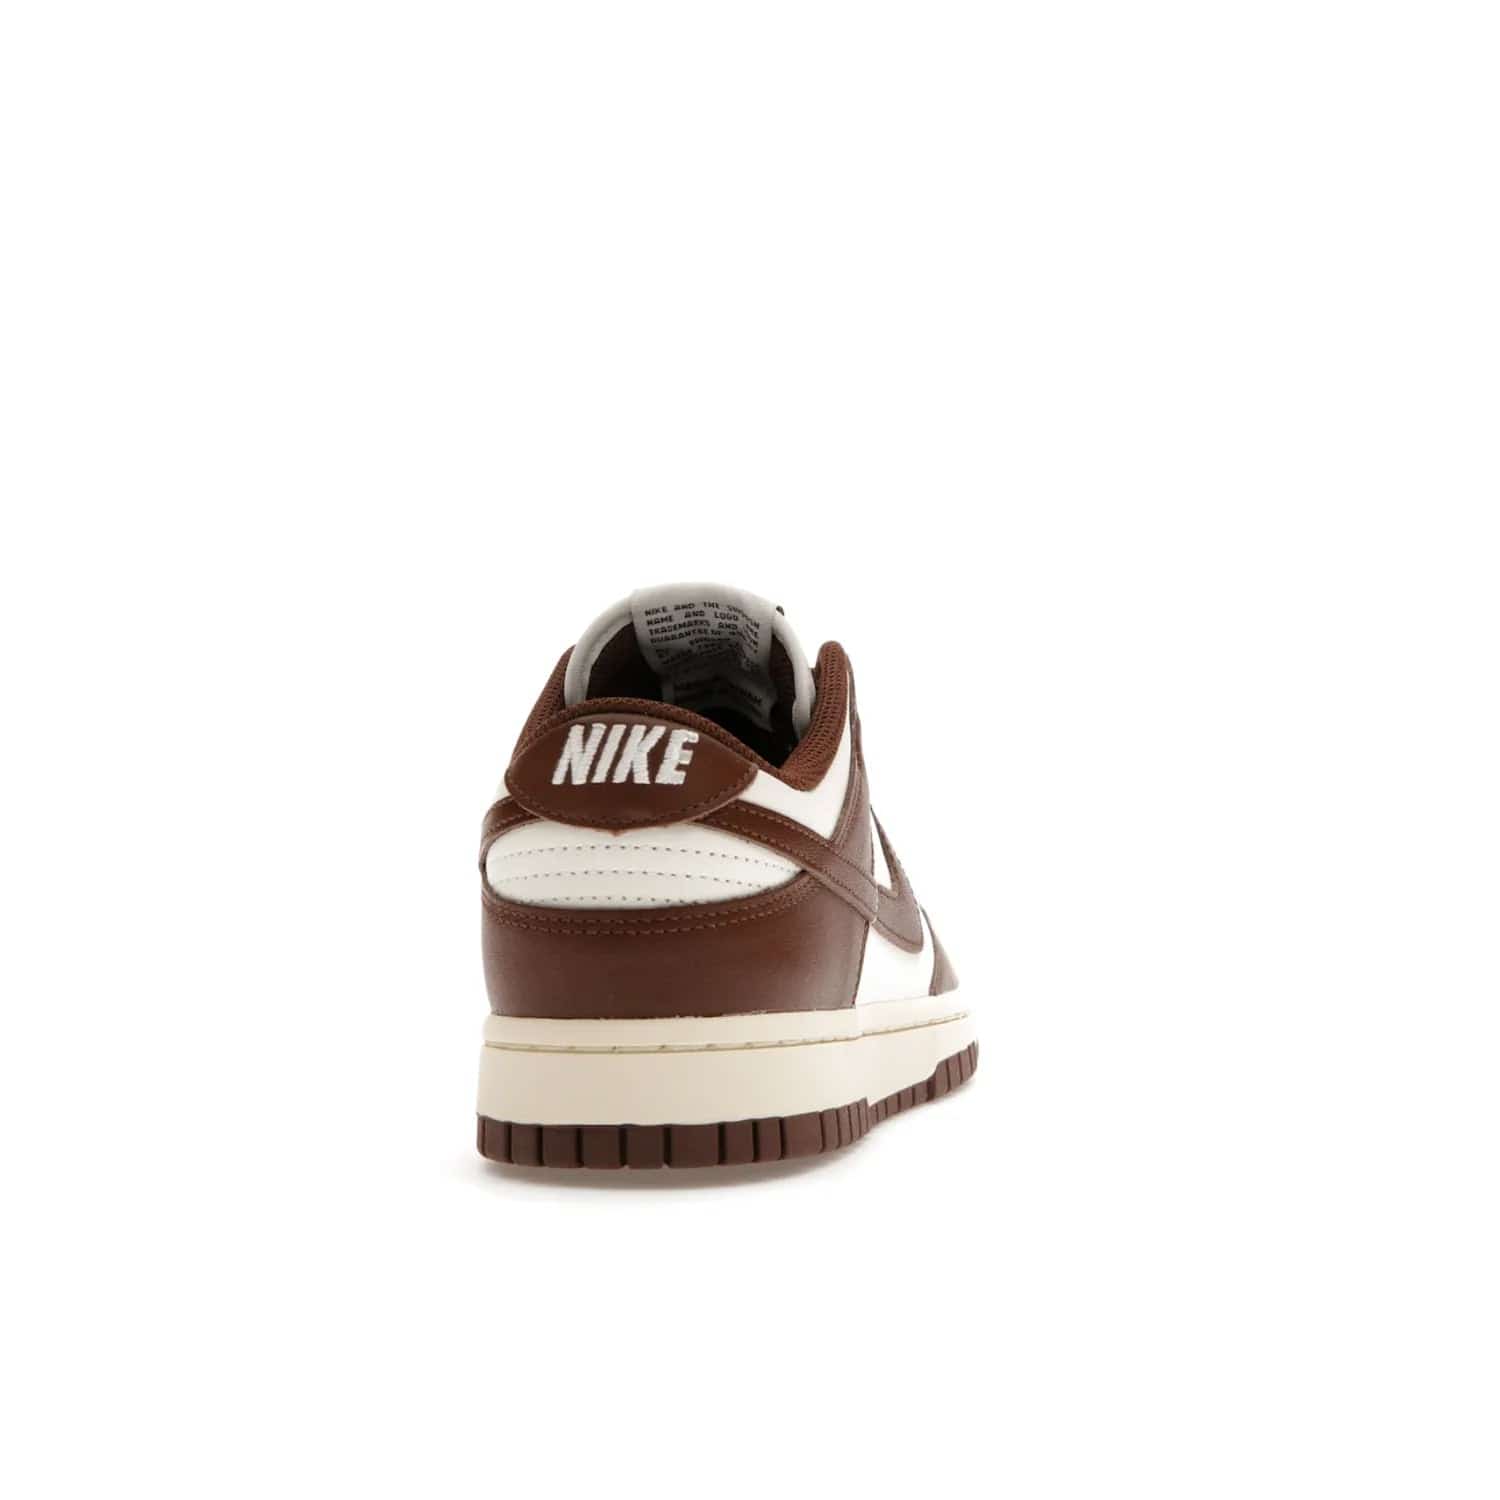 Nike Dunk Low Cacao Wow (Women's) - Image 29 - Only at www.BallersClubKickz.com - Revised
Get the Nike Dunk Low Cacao Wow and make a statement! Plush leather and a cool Cacao Wow finish bring together a unique mix of comfort and fashion that will turn heads. Boosted with a Coconut Milk hue. Shop today.